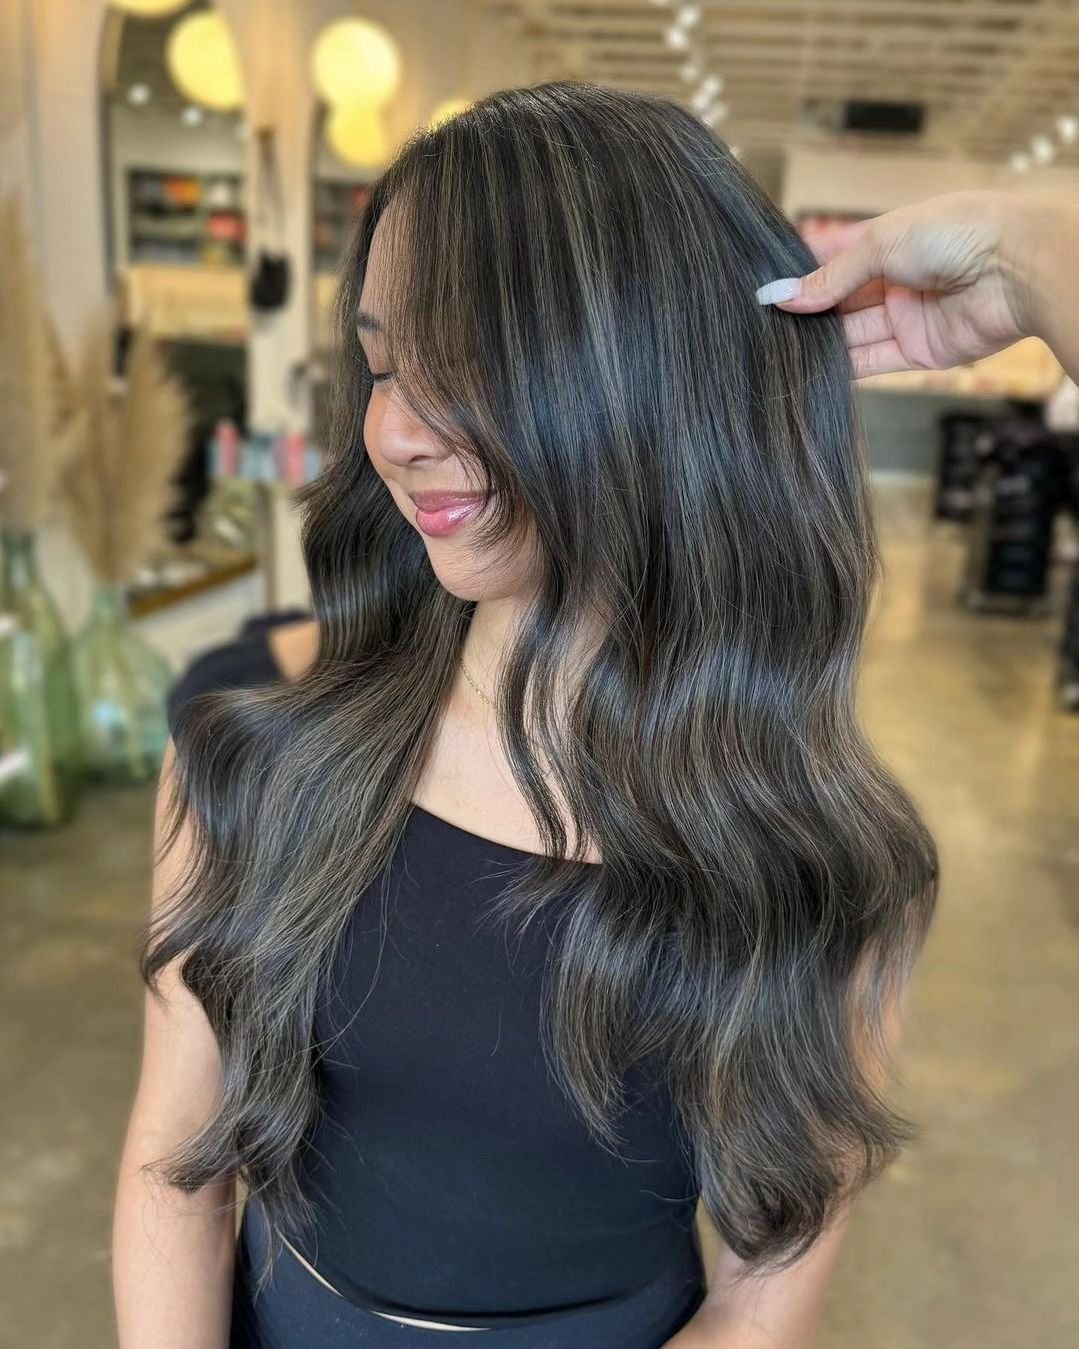 Dimensional Highlights by @hairbycvss 

.
.
.

#summervibes #ash #beige  #asianhair #newhair #balayage #balayageartists #balayagehighlights #highlighthair #highlights  #hairwaves #vancouverhair #vancouversalons #hairstylist #hairstudio #haircolorist 